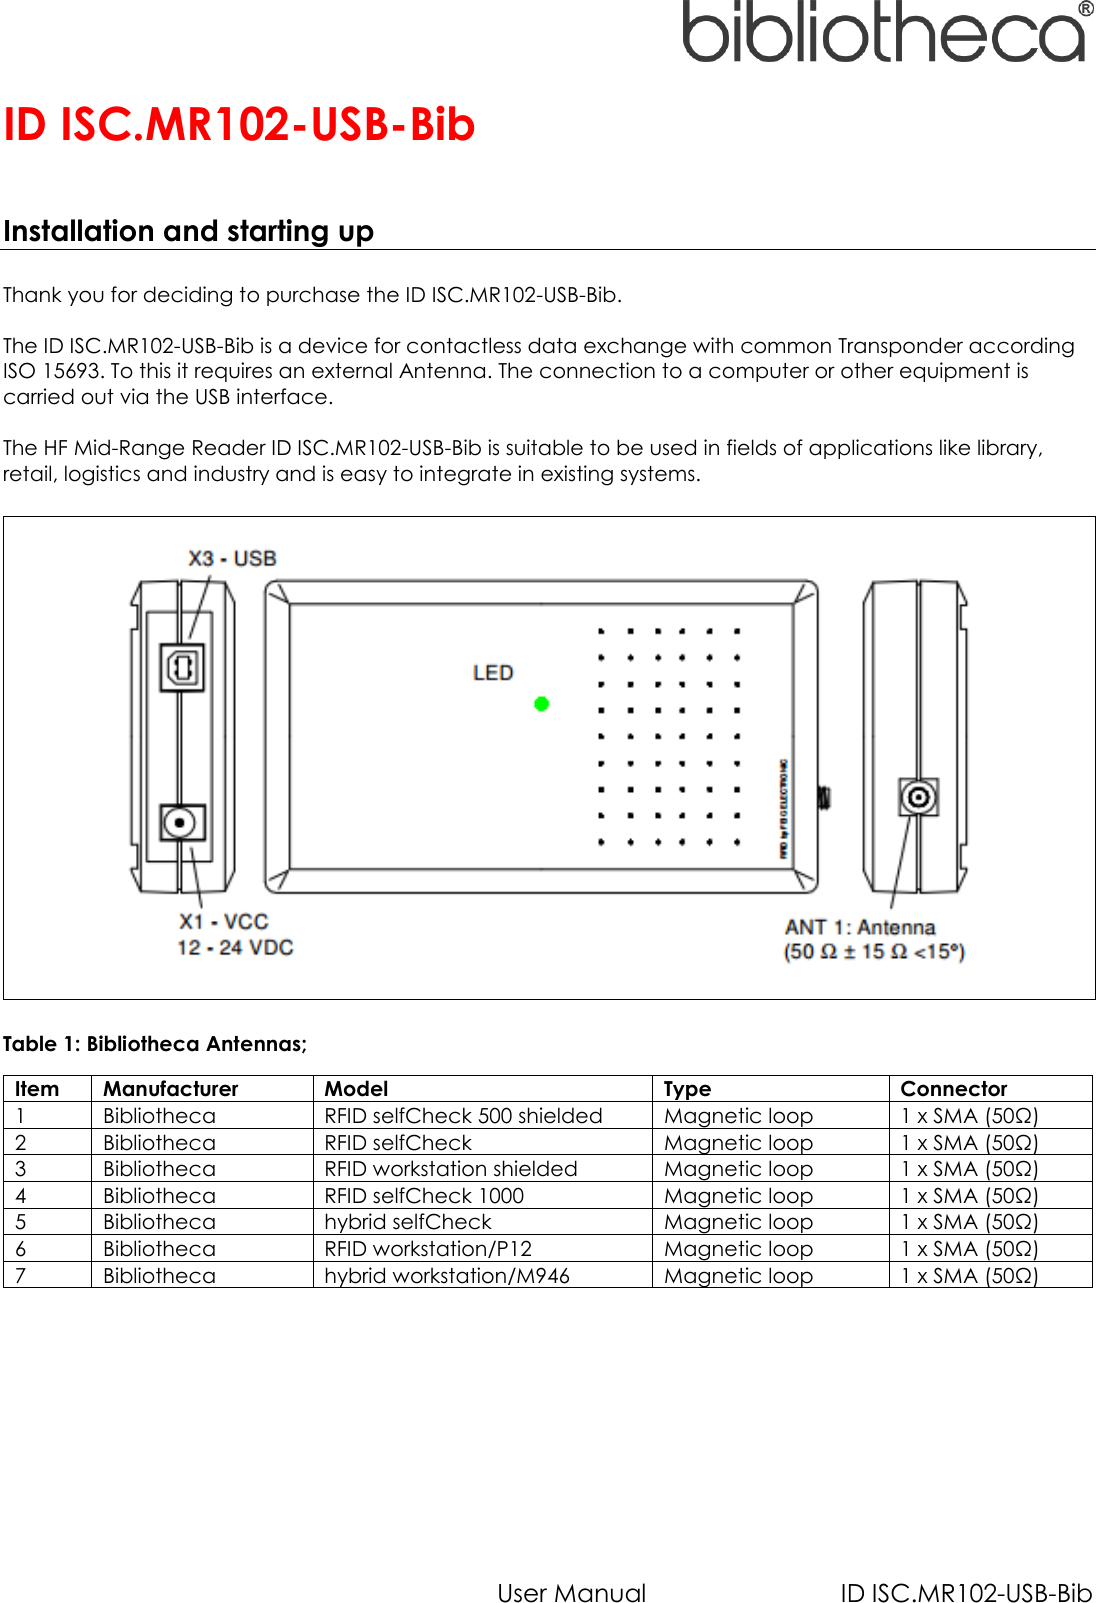   User Manual  ID ISC.MR102-USB-Bib ID ISC.MR102-USB-Bib    Installation and starting up  Thank you for deciding to purchase the ID ISC.MR102-USB-Bib.  The ID ISC.MR102-USB-Bib is a device for contactless data exchange with common Transponder according ISO 15693. To this it requires an external Antenna. The connection to a computer or other equipment is carried out via the USB interface.  The HF Mid-Range Reader ID ISC.MR102-USB-Bib is suitable to be used in fields of applications like library, retail, logistics and industry and is easy to integrate in existing systems.      Table 1: Bibliotheca Antennas; Item Manufacturer Model Type Connector 1 Bibliotheca RFID selfCheck 500 shielded Magnetic loop 1 x SMA (50Ω) 2 Bibliotheca RFID selfCheck Magnetic loop 1 x SMA (50Ω) 3 Bibliotheca RFID workstation shielded Magnetic loop 1 x SMA (50Ω) 4 Bibliotheca RFID selfCheck 1000 Magnetic loop 1 x SMA (50Ω) 5 Bibliotheca hybrid selfCheck Magnetic loop 1 x SMA (50Ω) 6 Bibliotheca RFID workstation/P12 Magnetic loop 1 x SMA (50Ω) 7 Bibliotheca hybrid workstation/M946 Magnetic loop 1 x SMA (50Ω)     